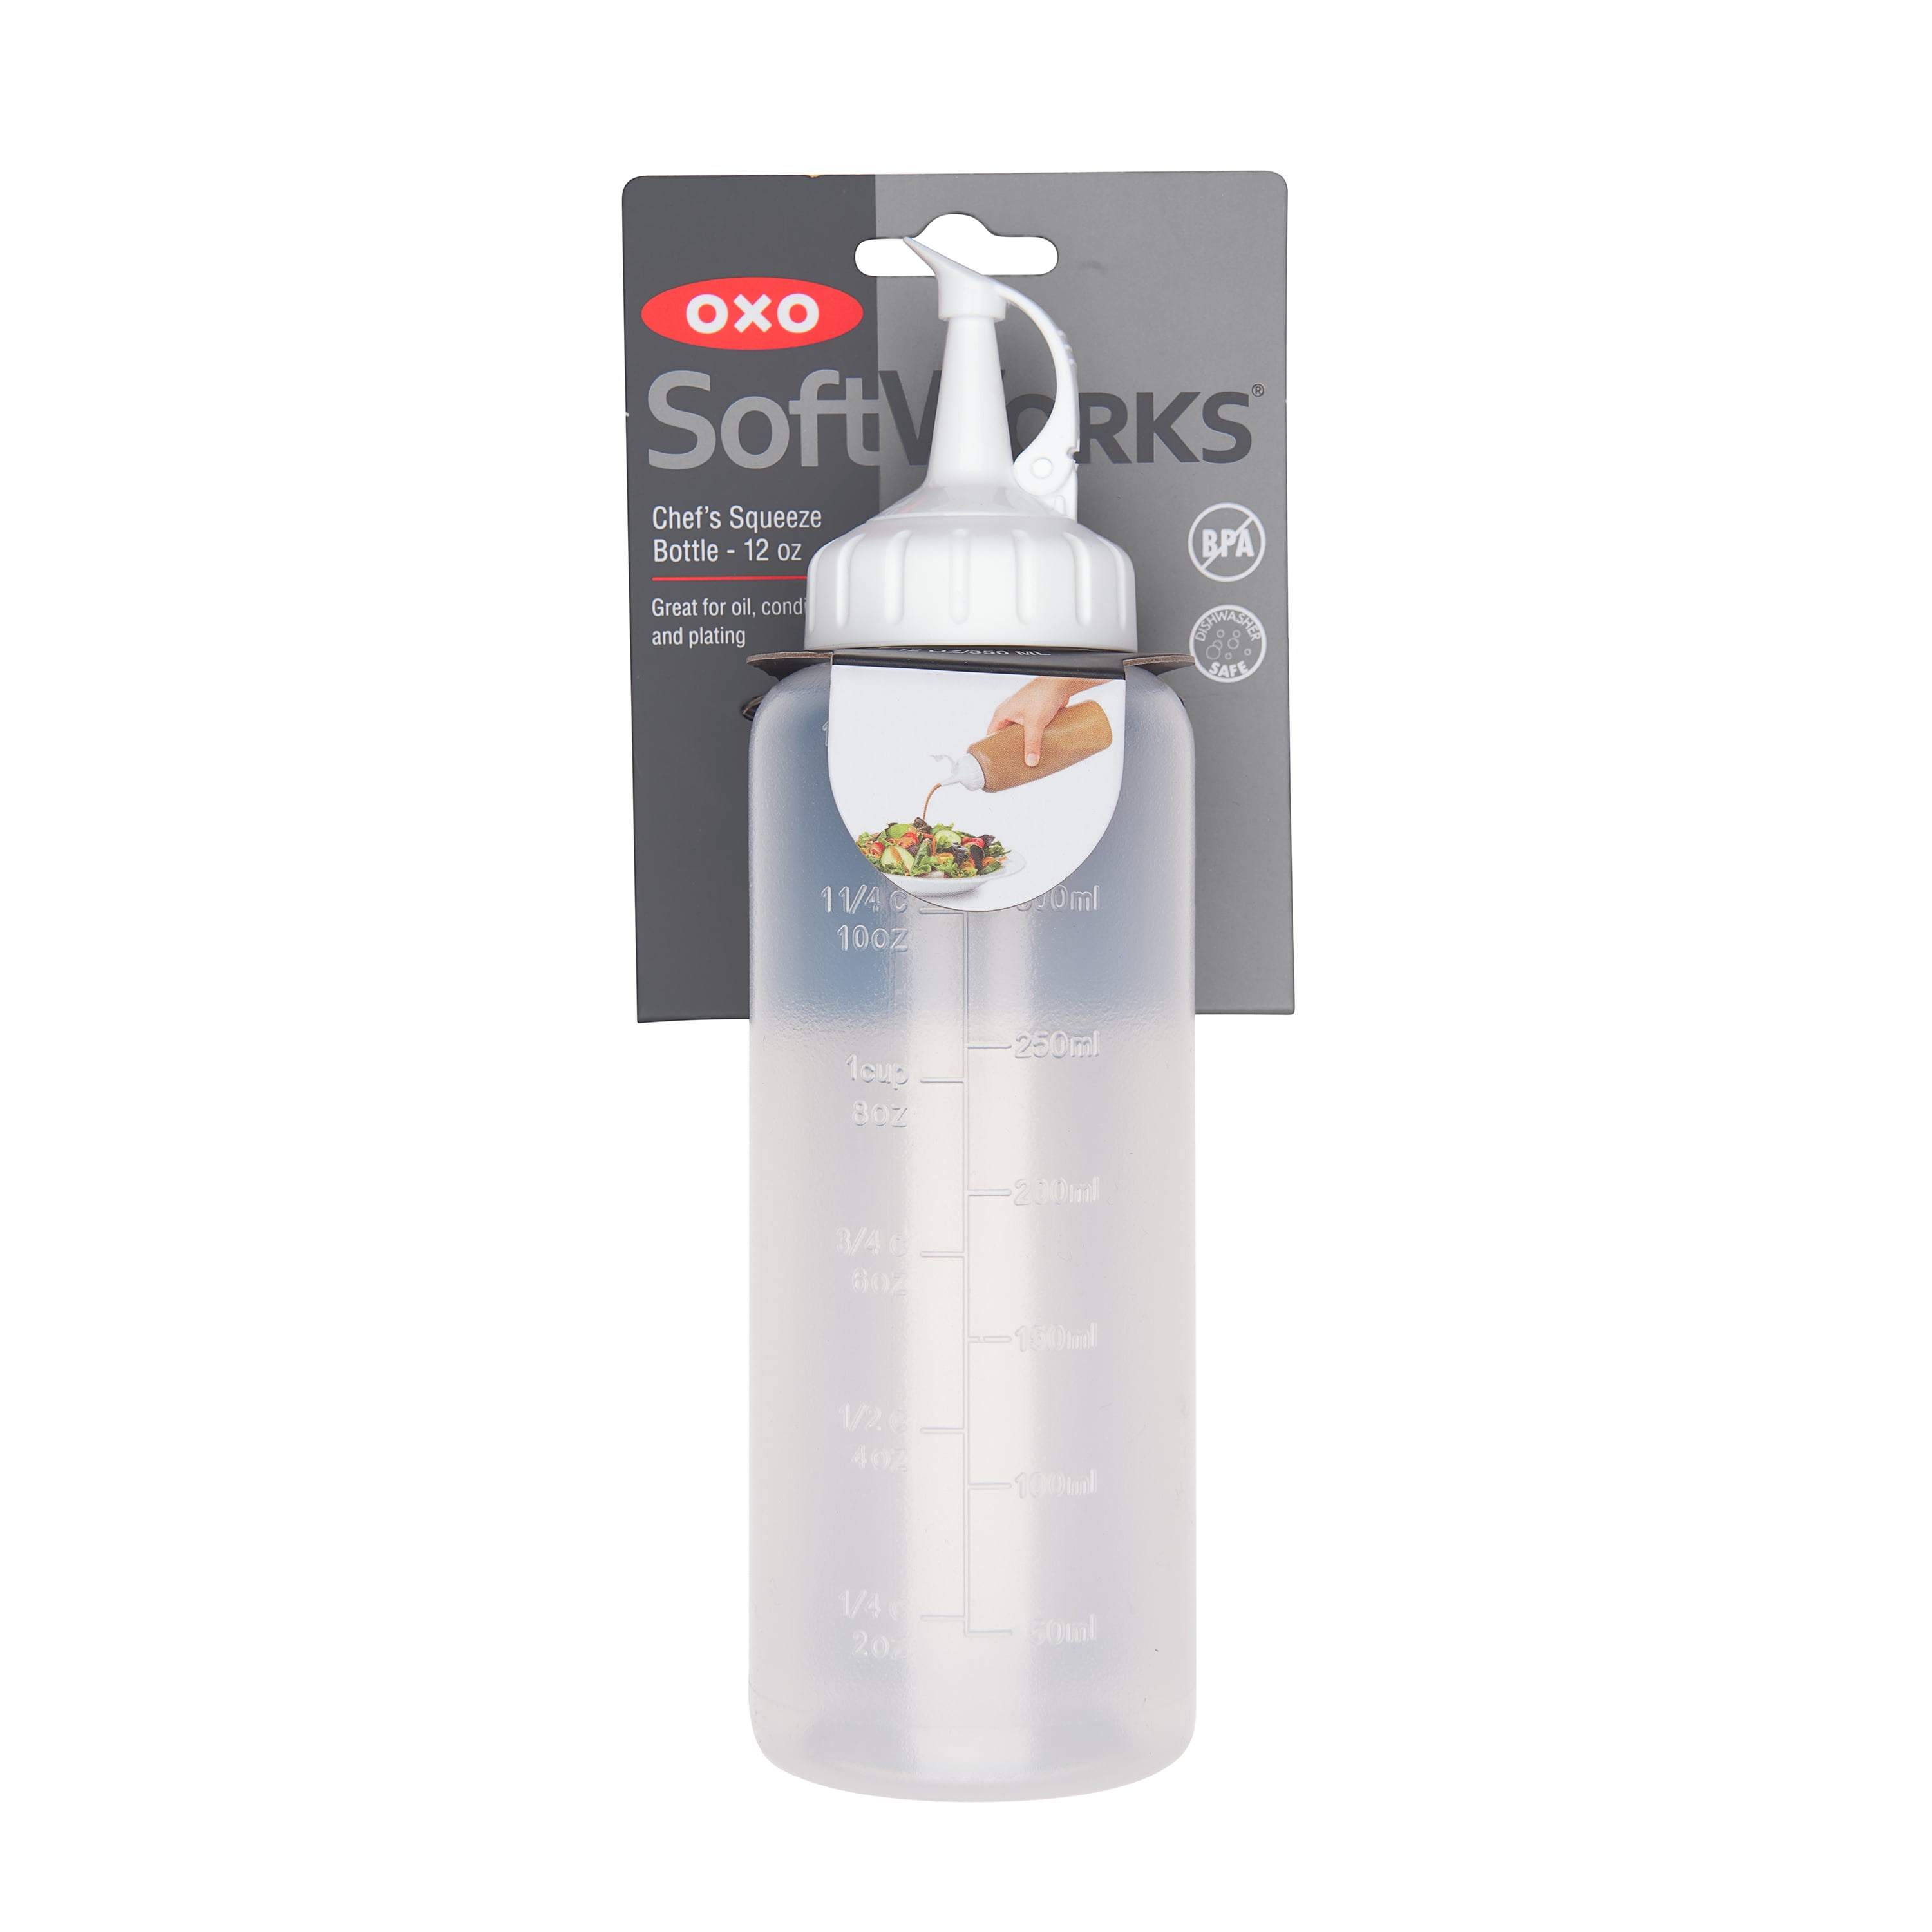 OXO SoftWorks Chef's Squeeze Bottle 12oz. NEW 2-Pack